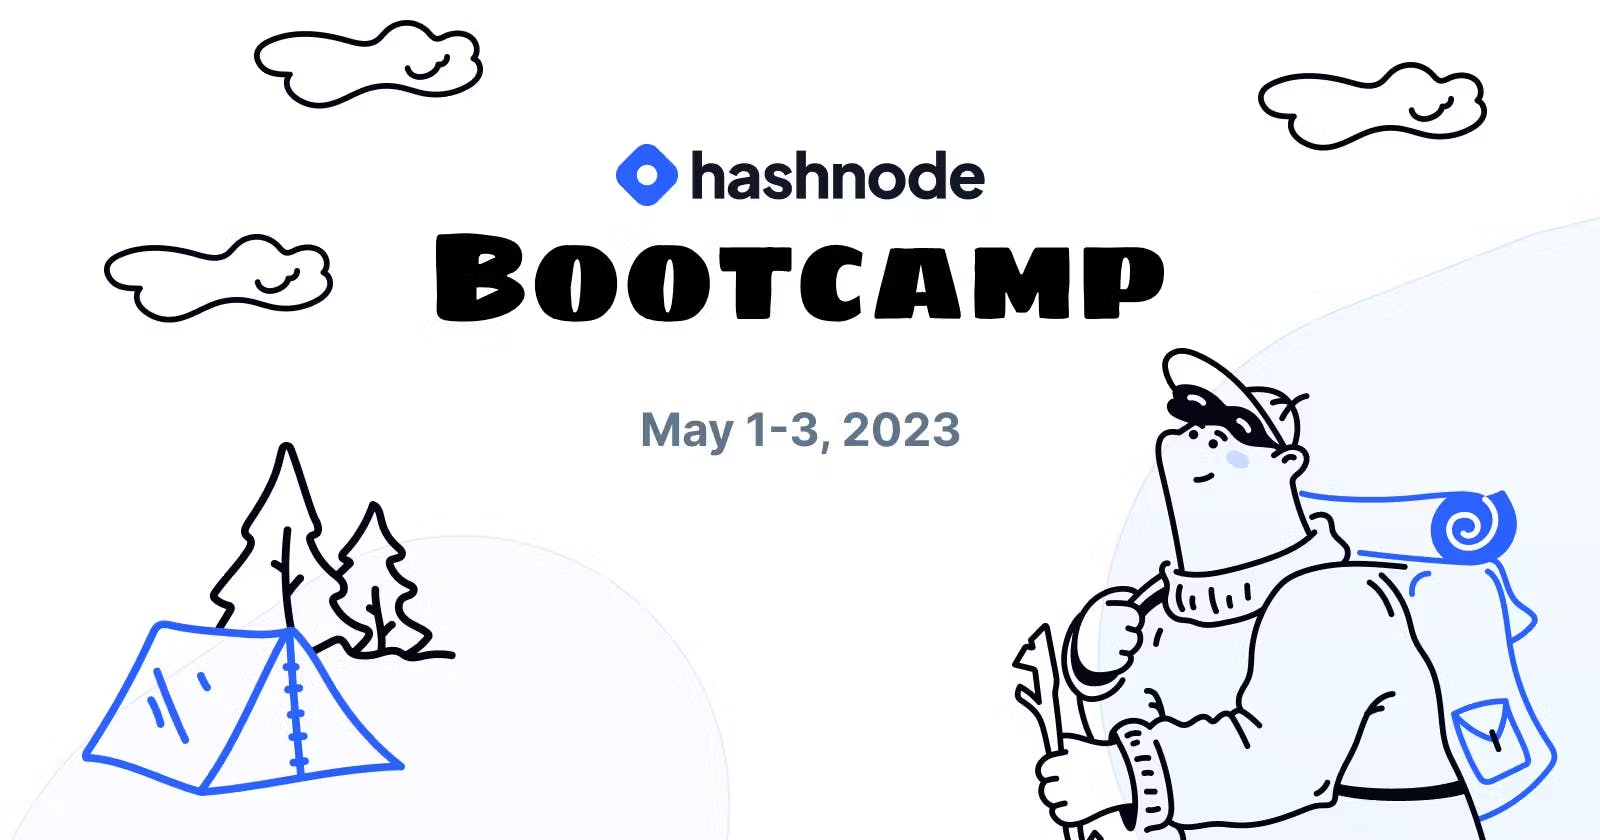 My Experience joining Hashnode Bootcamp